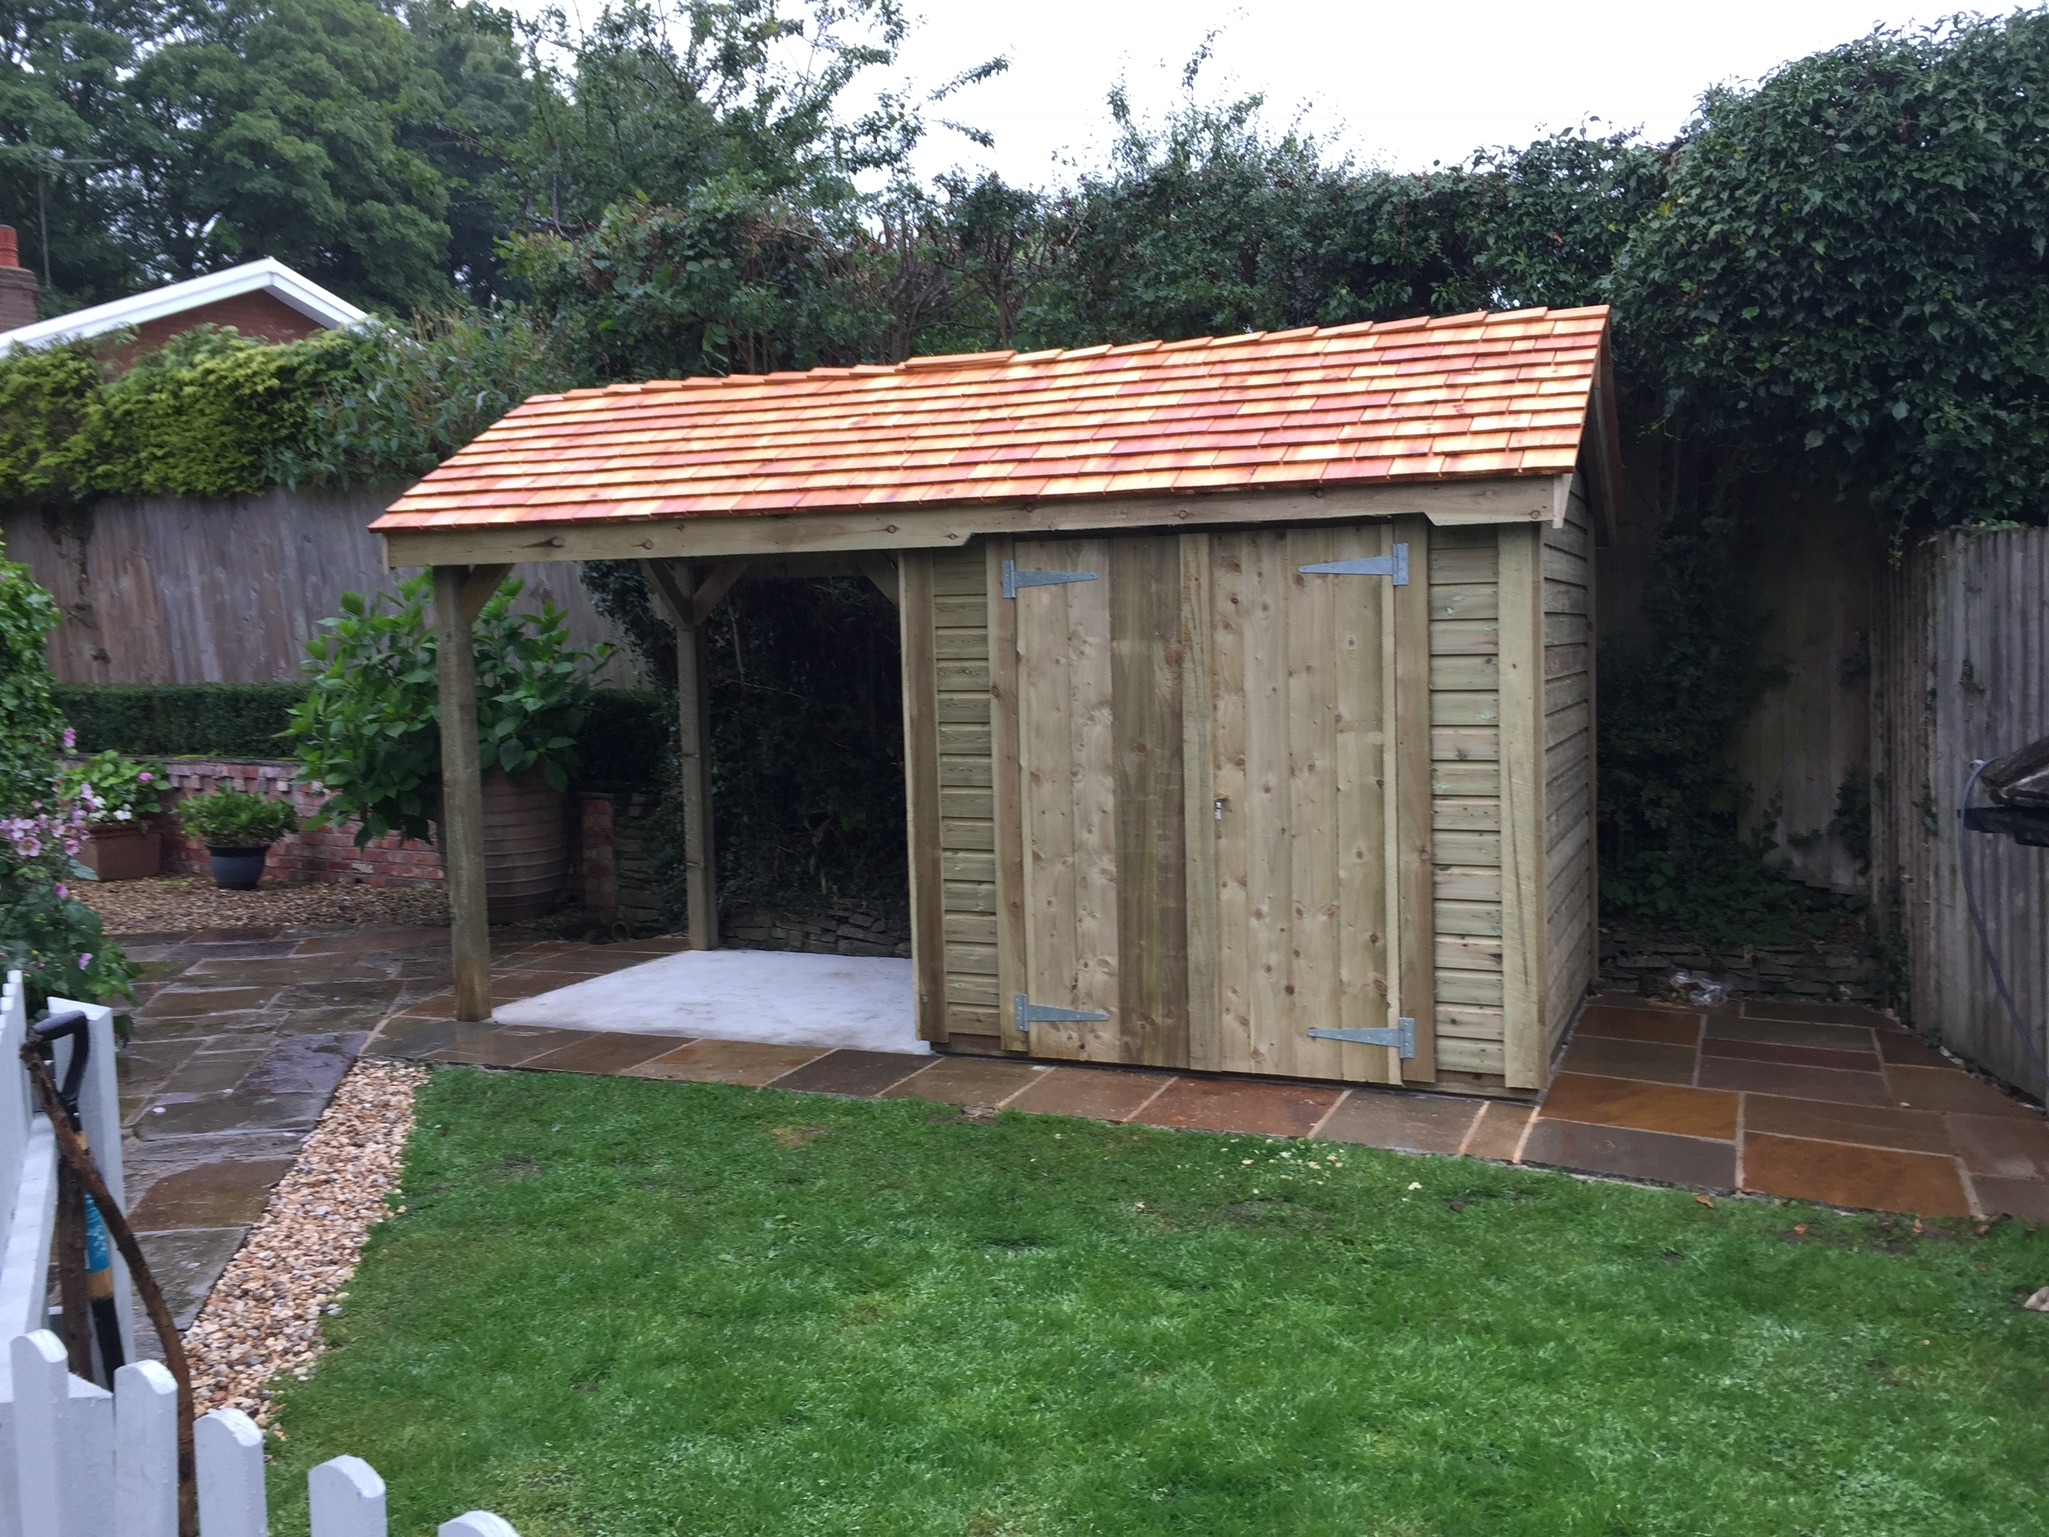 Timber structure with cedar shingle roof and storage for log storage and large storage cupboard section